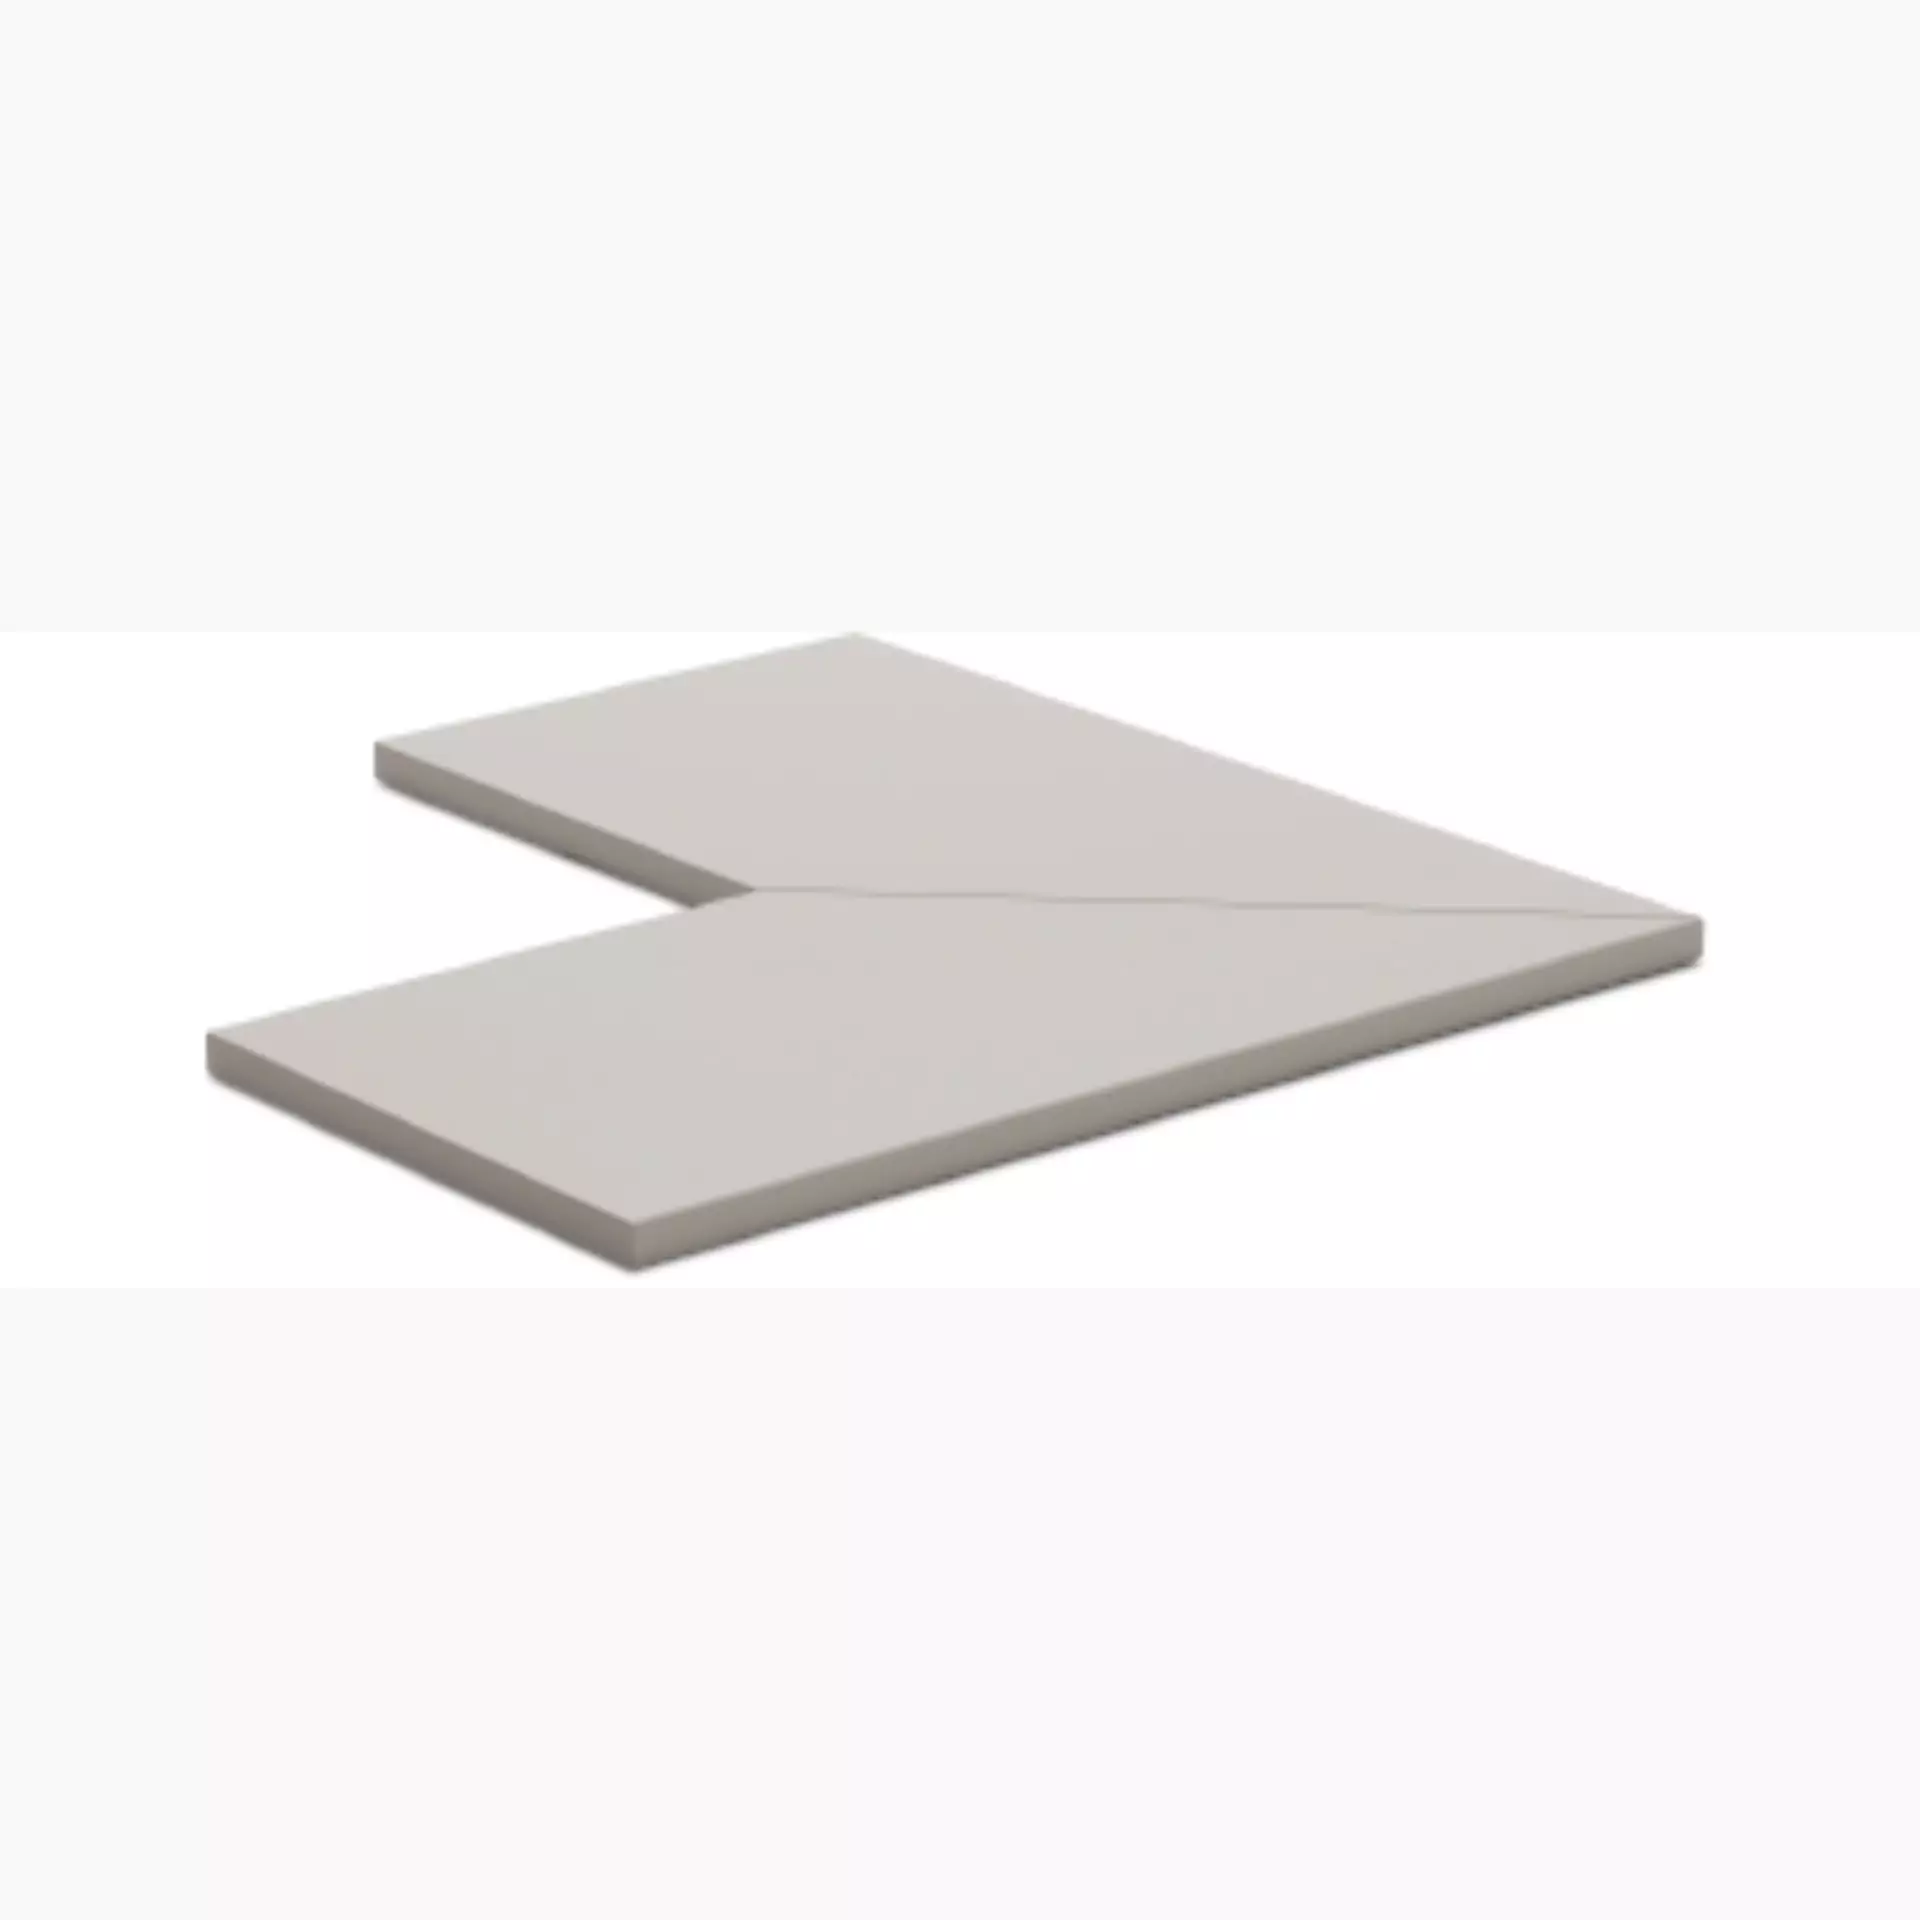 Sichenia Space Silver Grip Stair plate Costa Lucida Corner Outside 0184052 30x60cm rectified 20mm